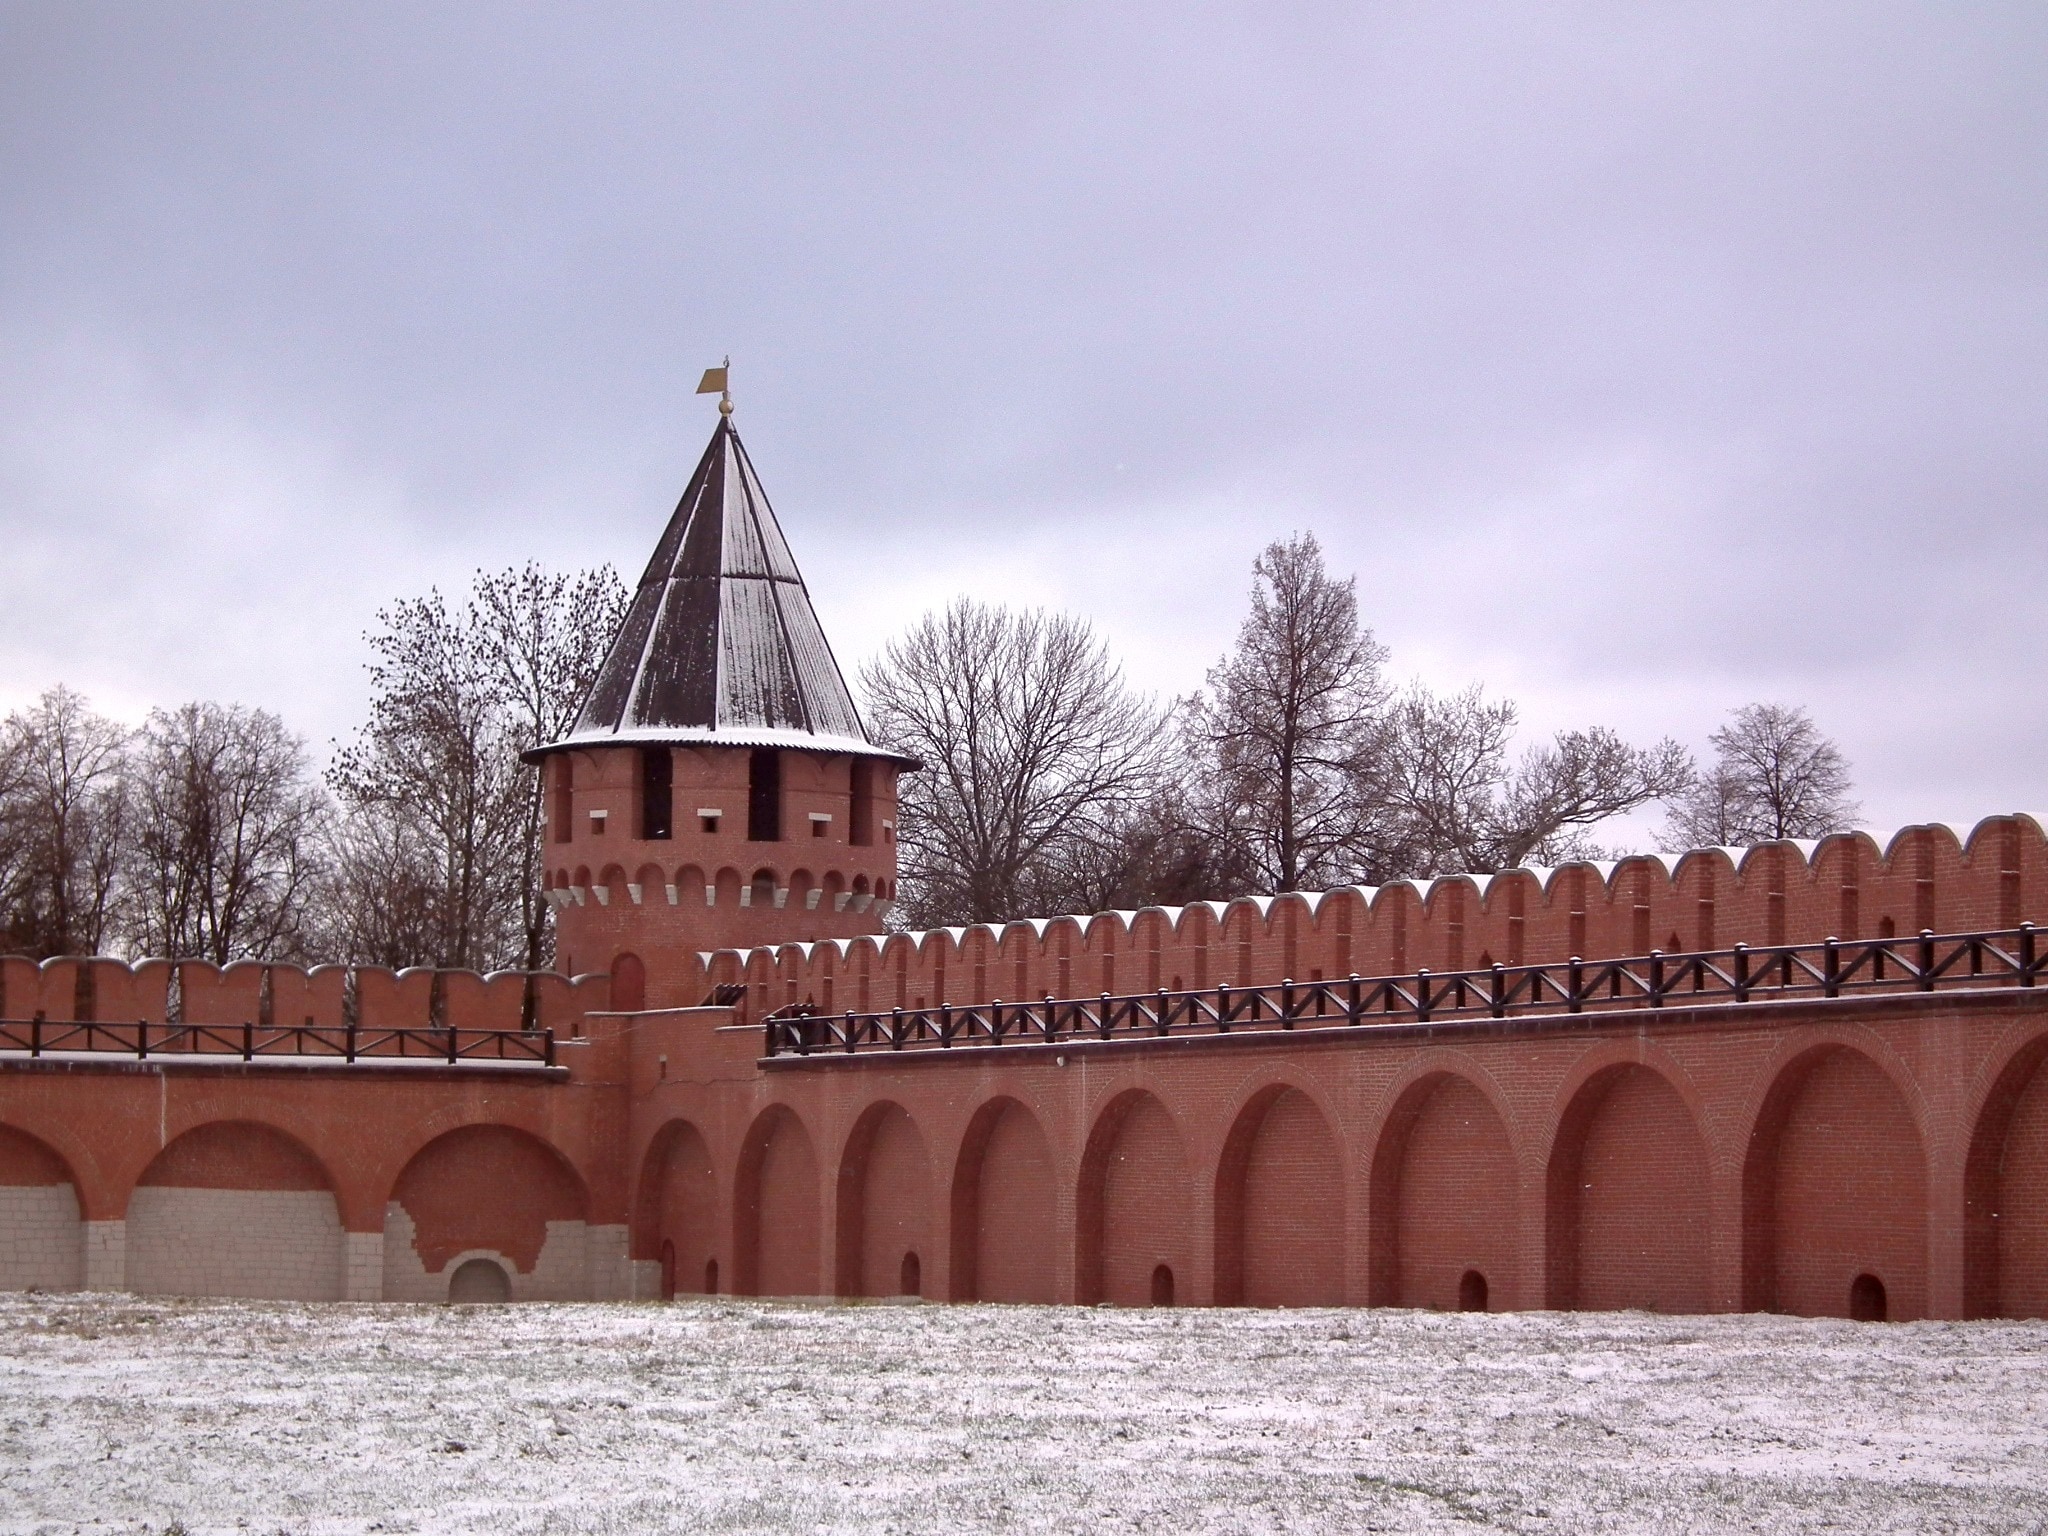 Fortress, Tower, Fence, Wall, Brick, Day, architecture, winter